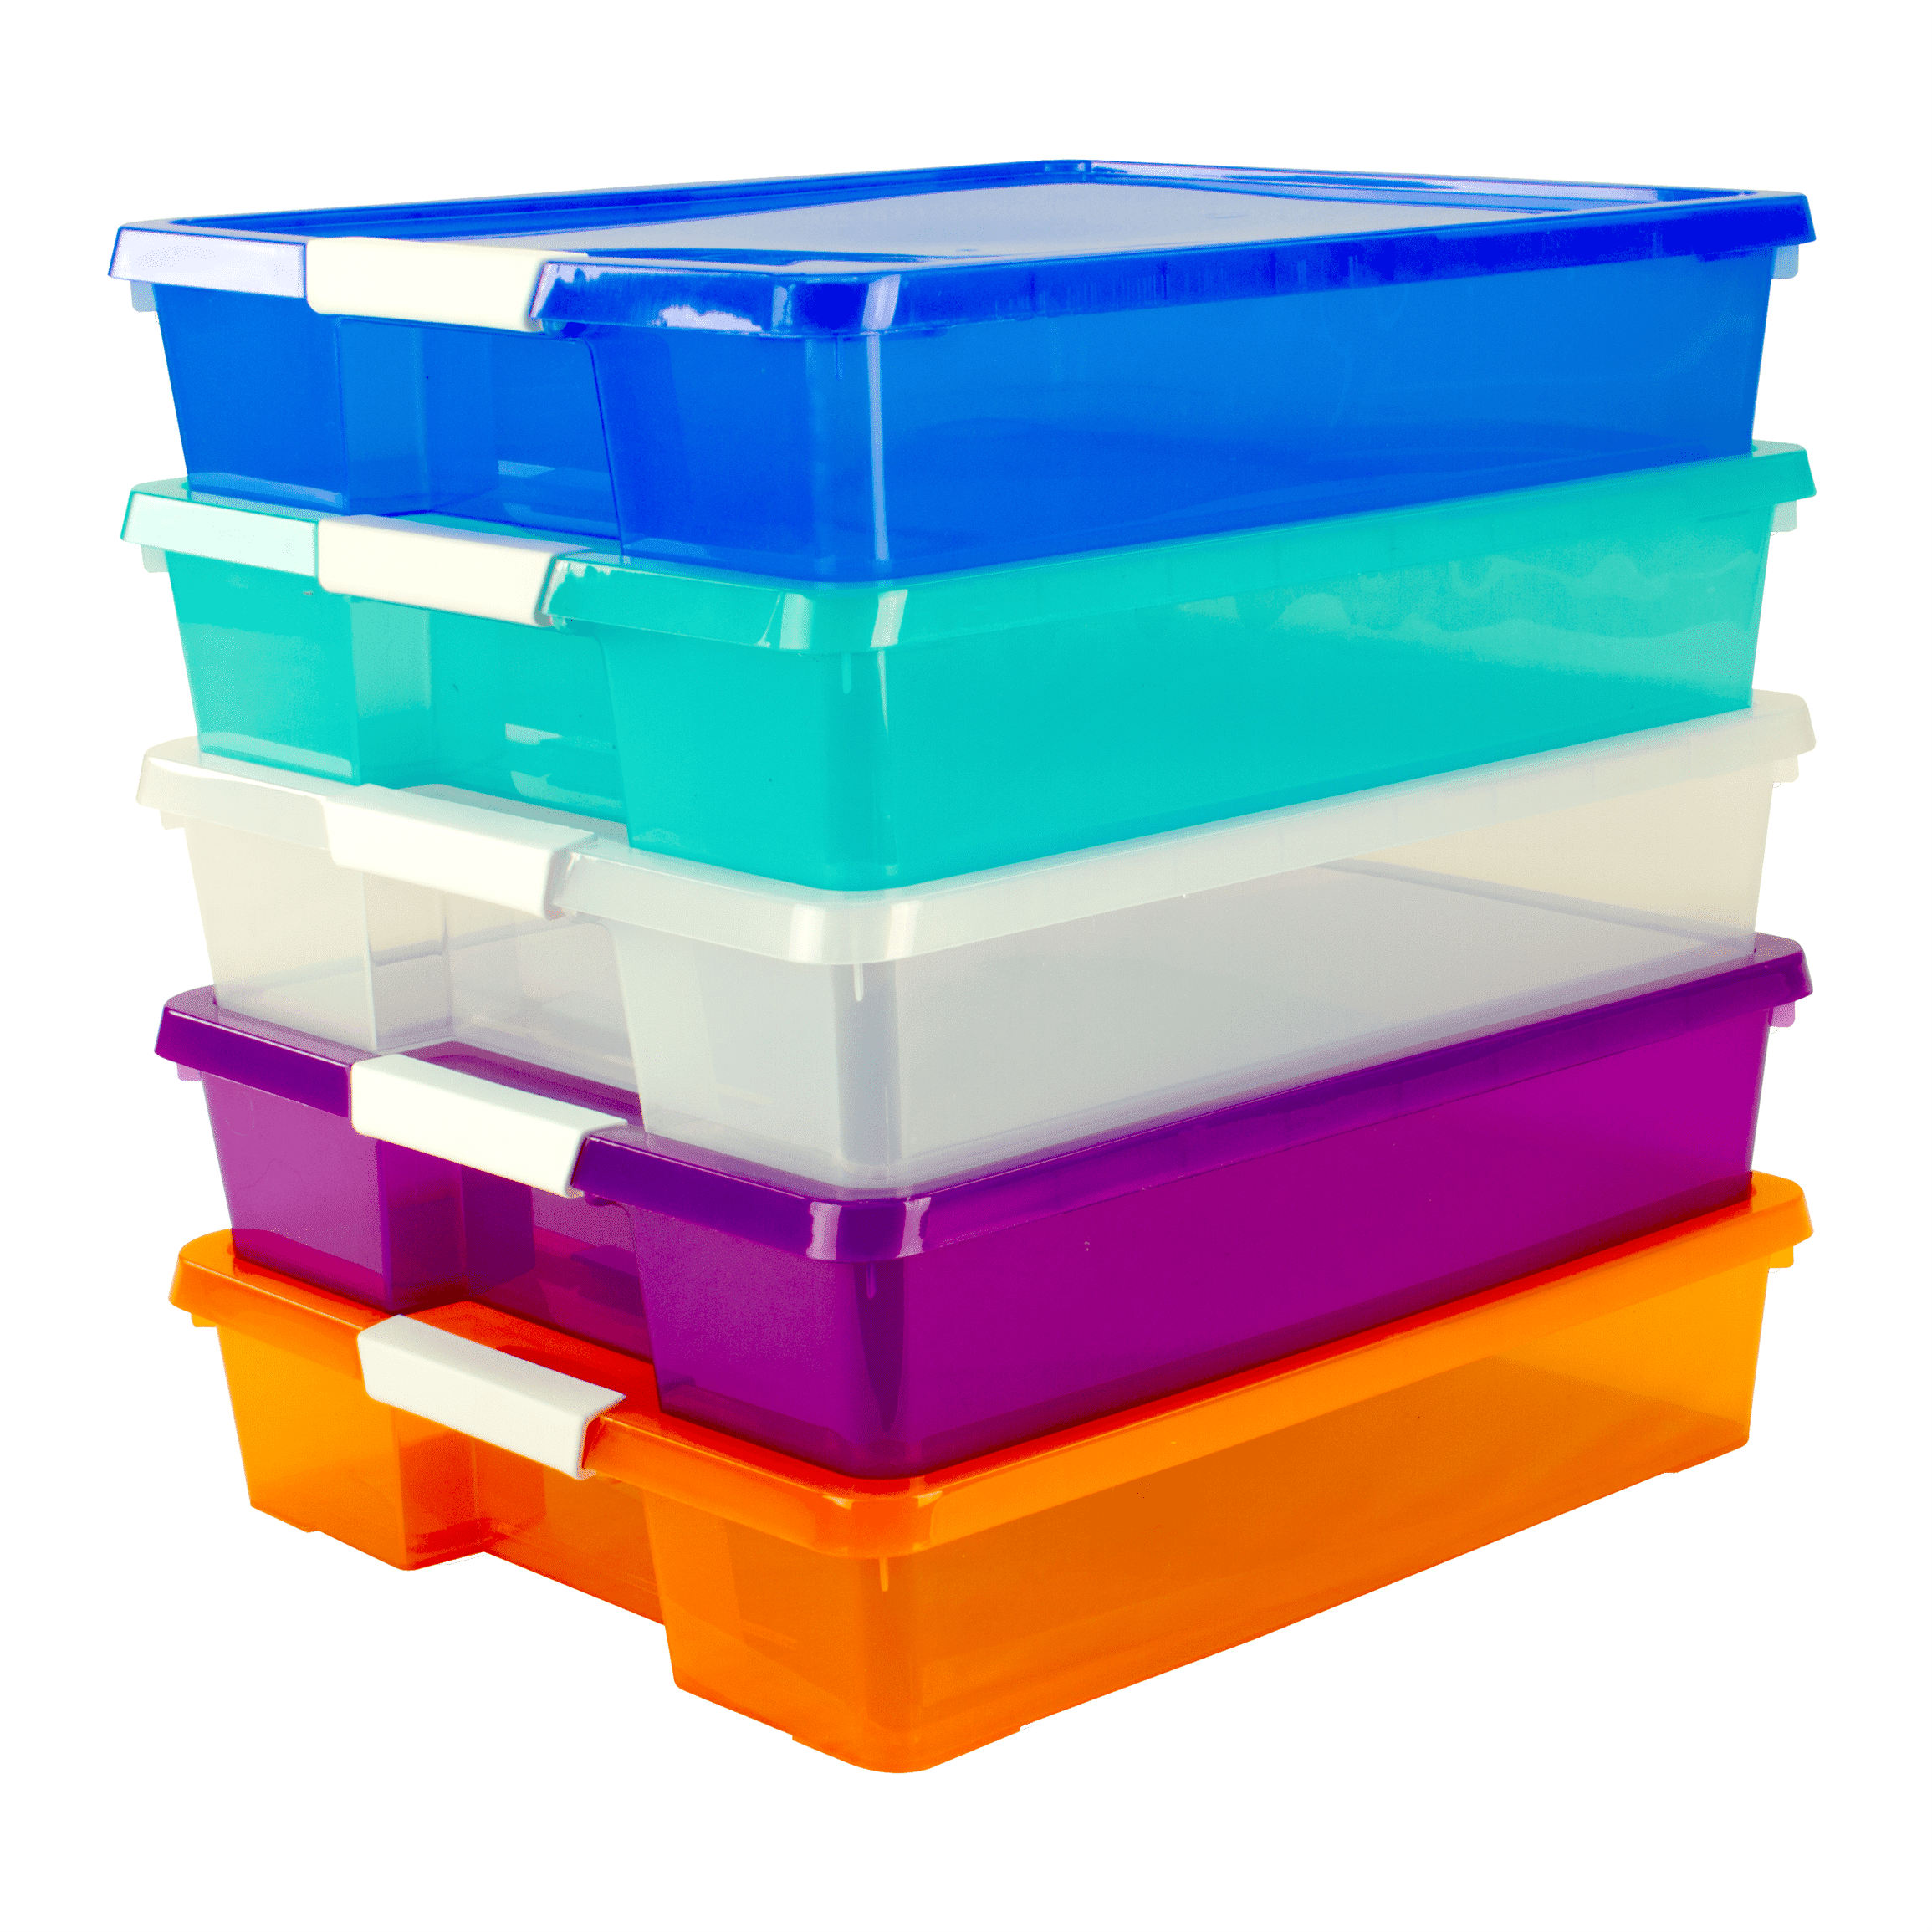 Basicwise 7 oz. Assorted Colors 2-Red, 2-Green, 2-Blue Freezer